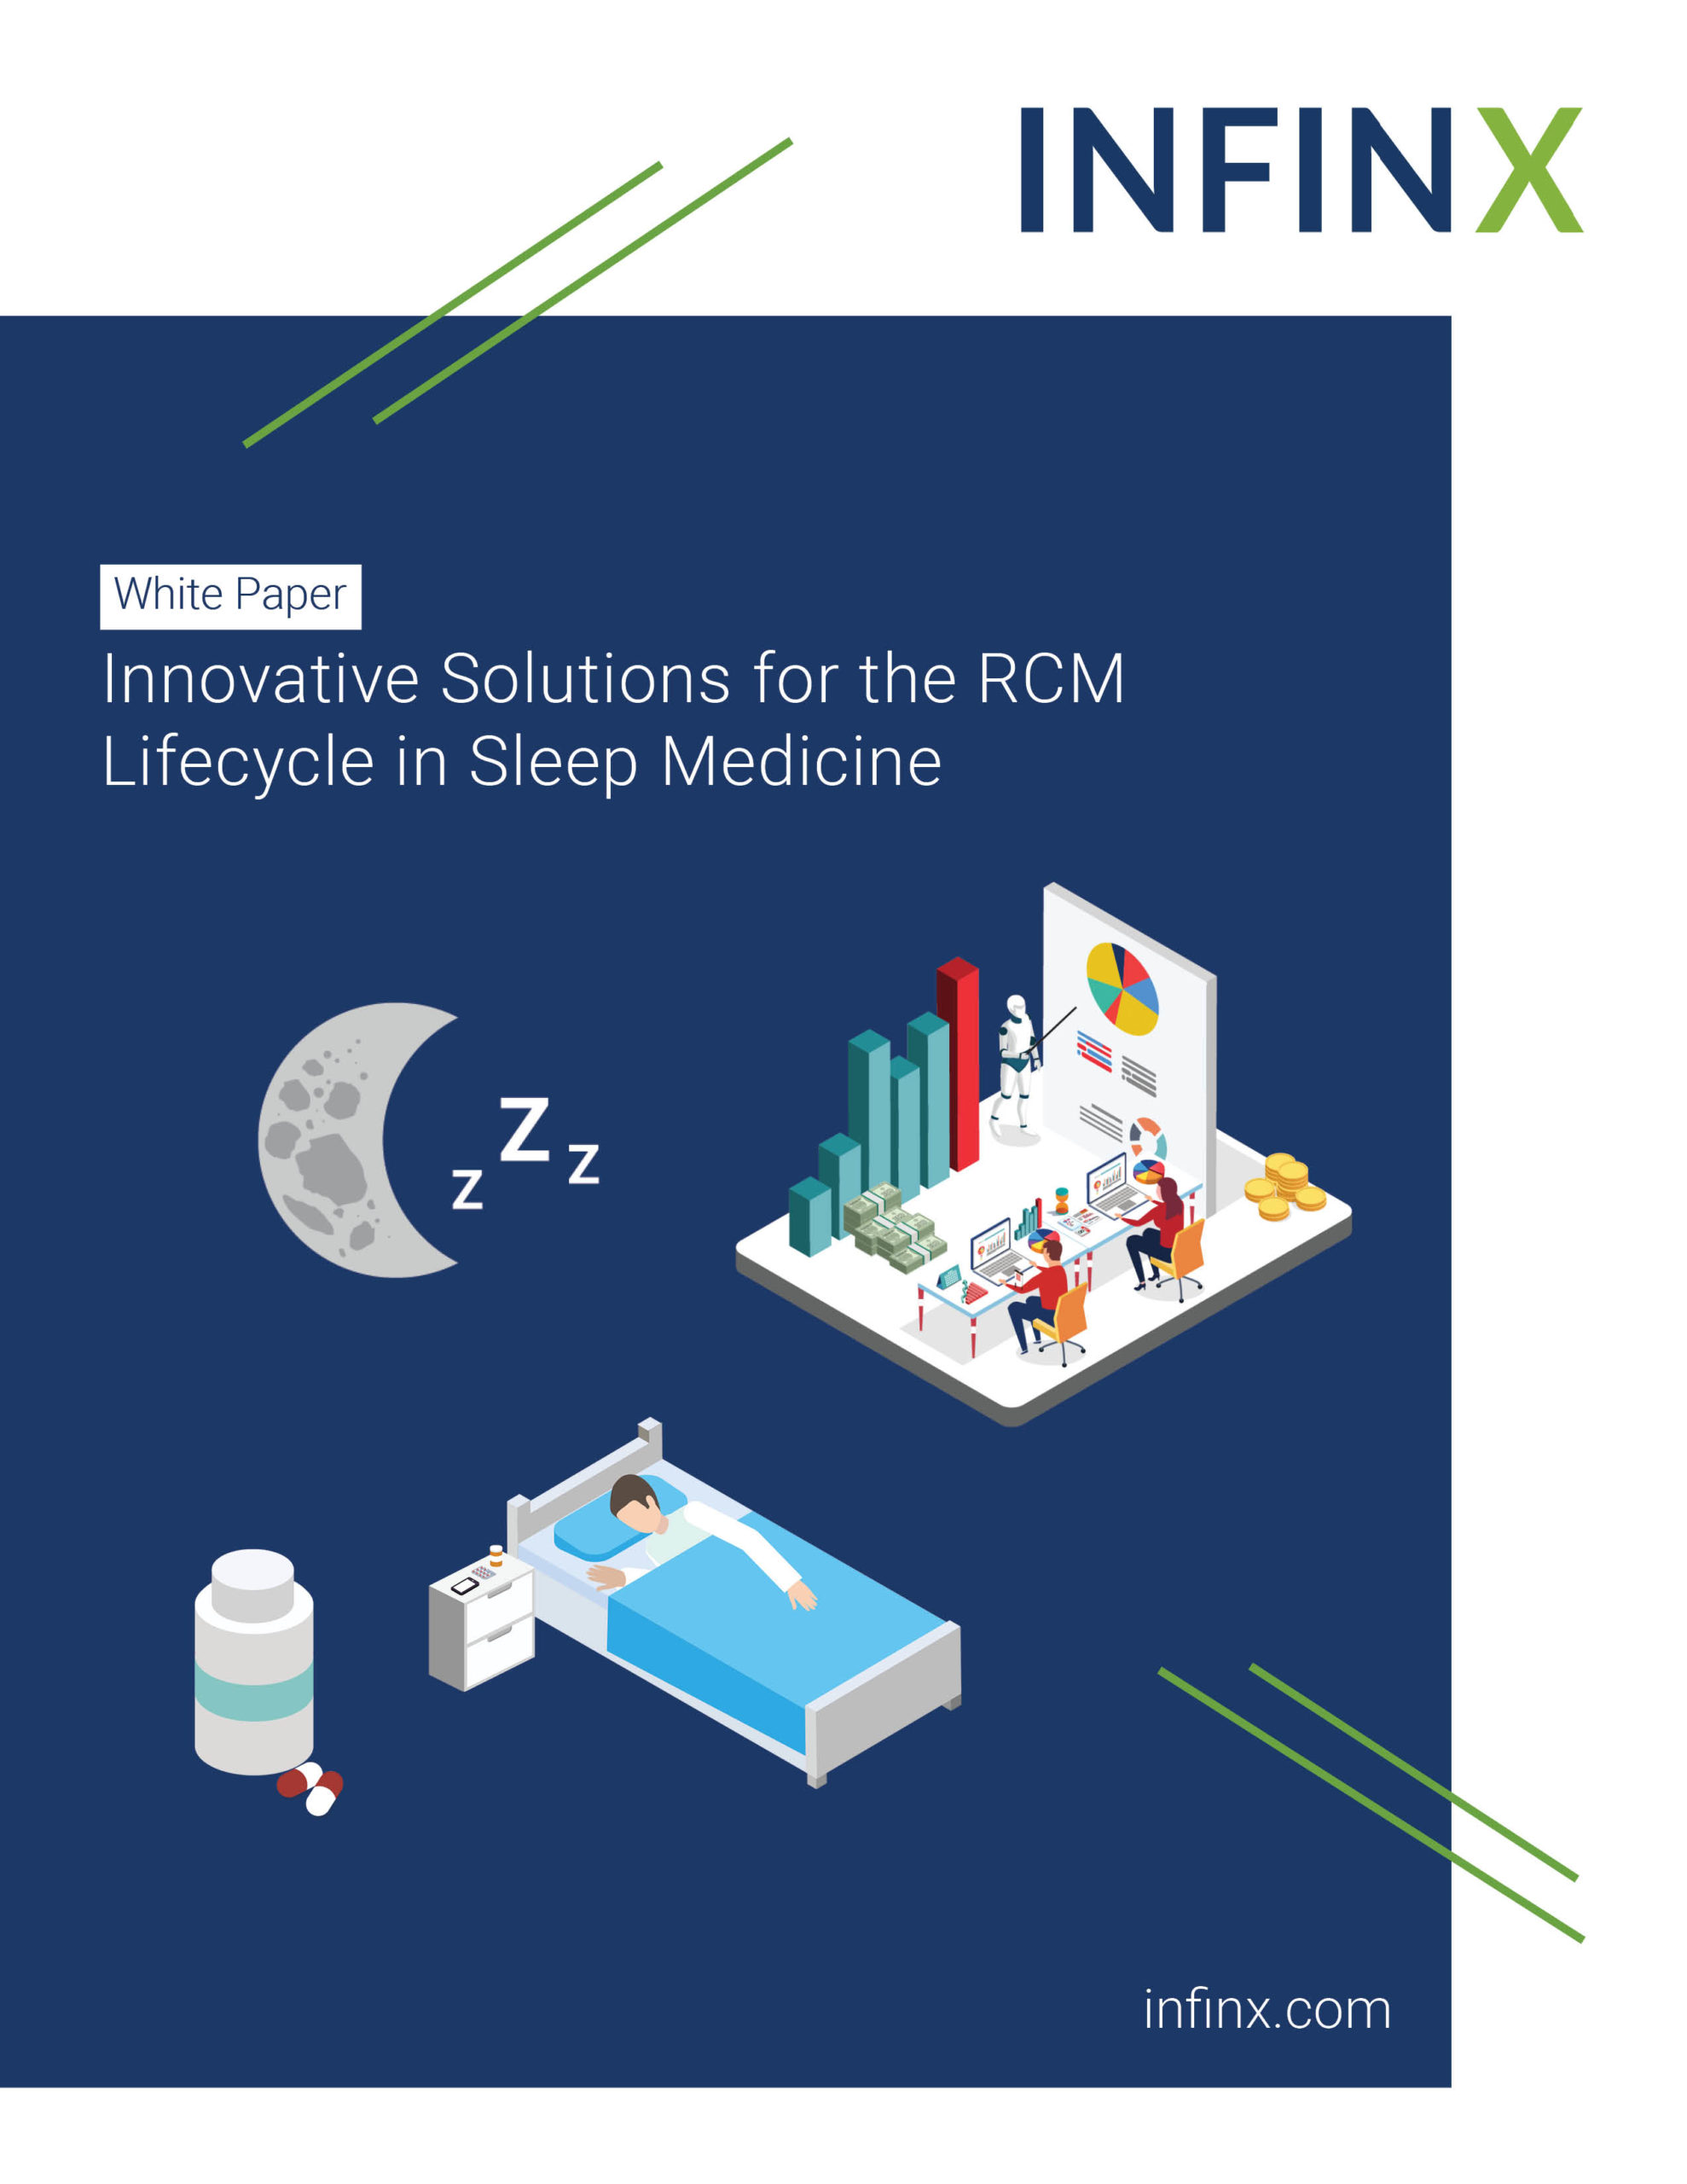 Infinx - White Paper - Innovative Solutions for the RCM Lifecycle in Sleep Medicine - May2021 1